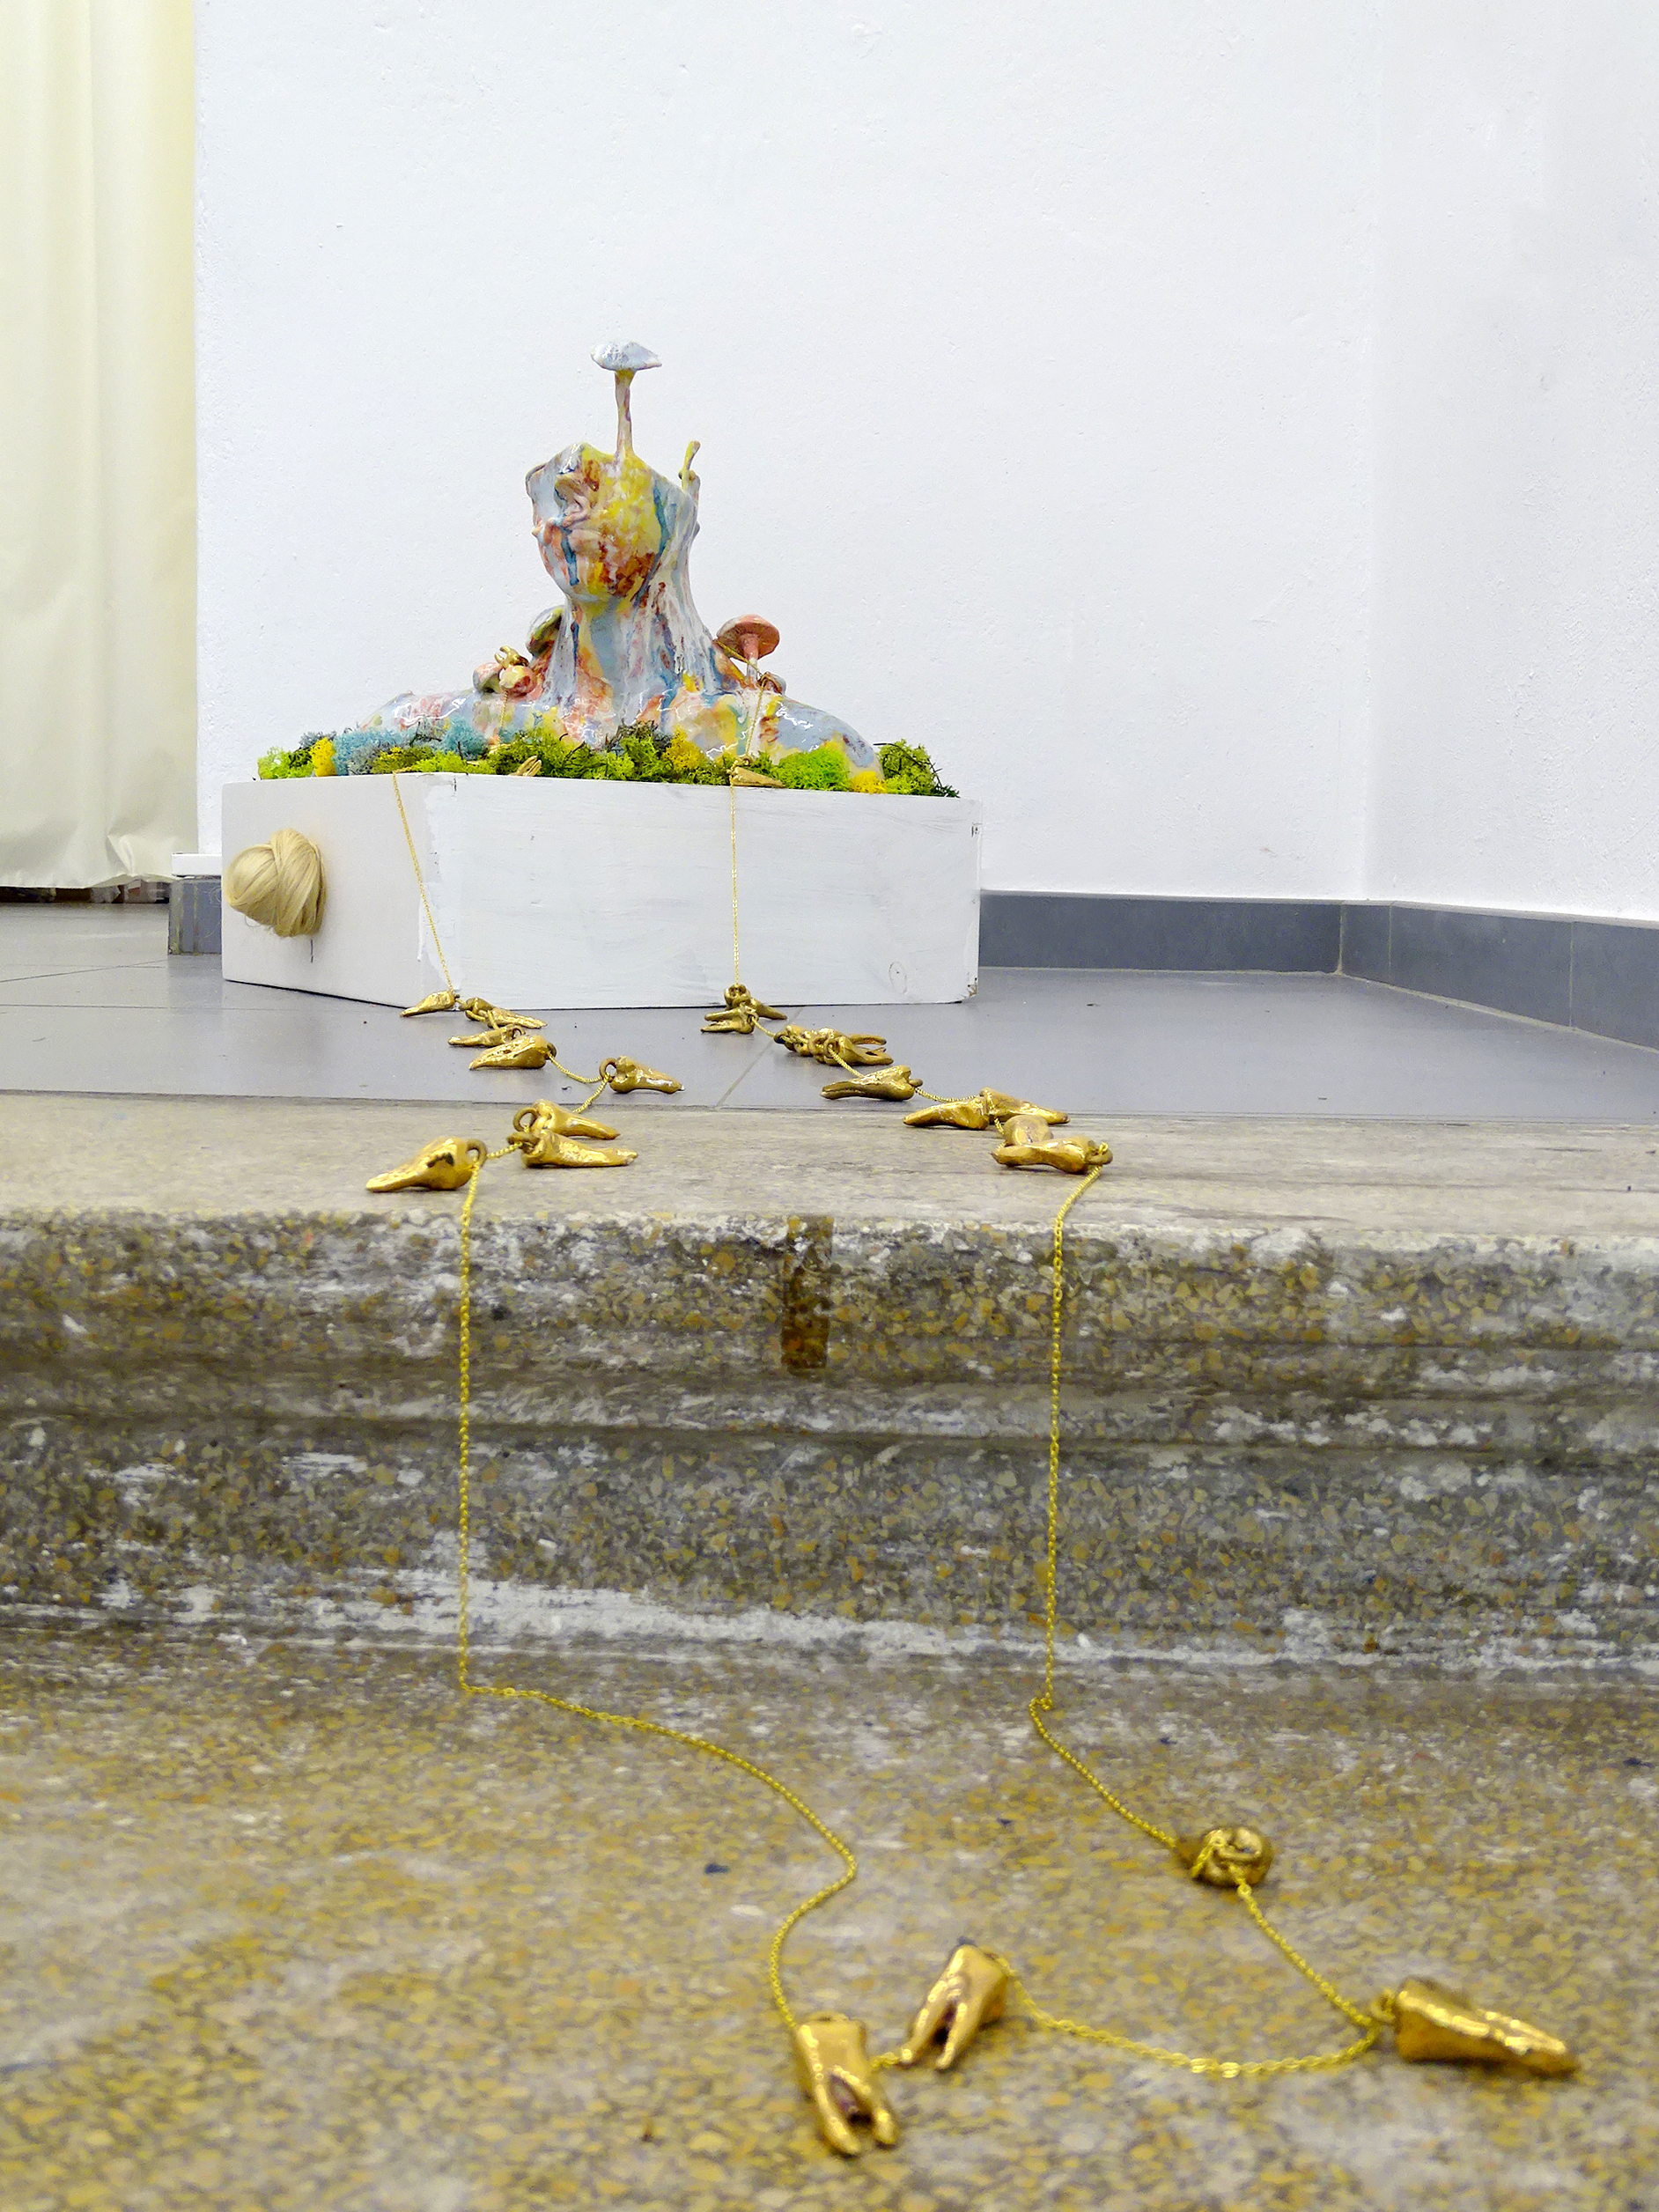 (05) Of All the Things I’ve Lost Proudick (Lindsey Mendick & Paloma Proudfoot) Installation view Hannah Barry Gallery at Ballon Rouge Club Brussels 2019  courtesy Hannah Barry Gallery.jpg